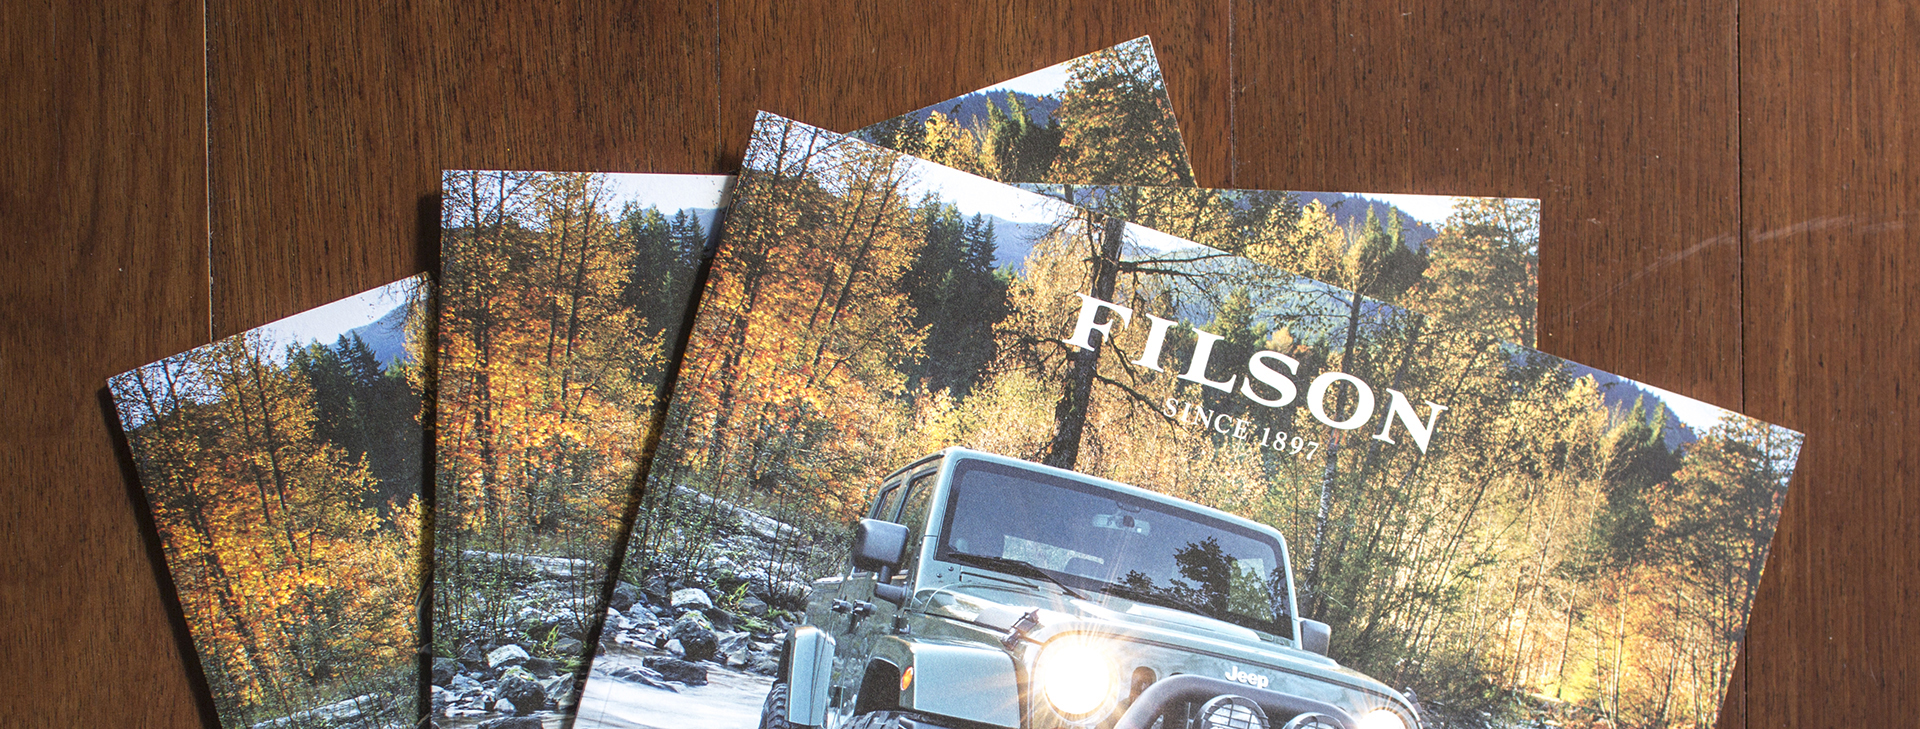 Designed to Communicate Style & Adventure: AEV Filson Edition Brochure |  Mohawk Connects